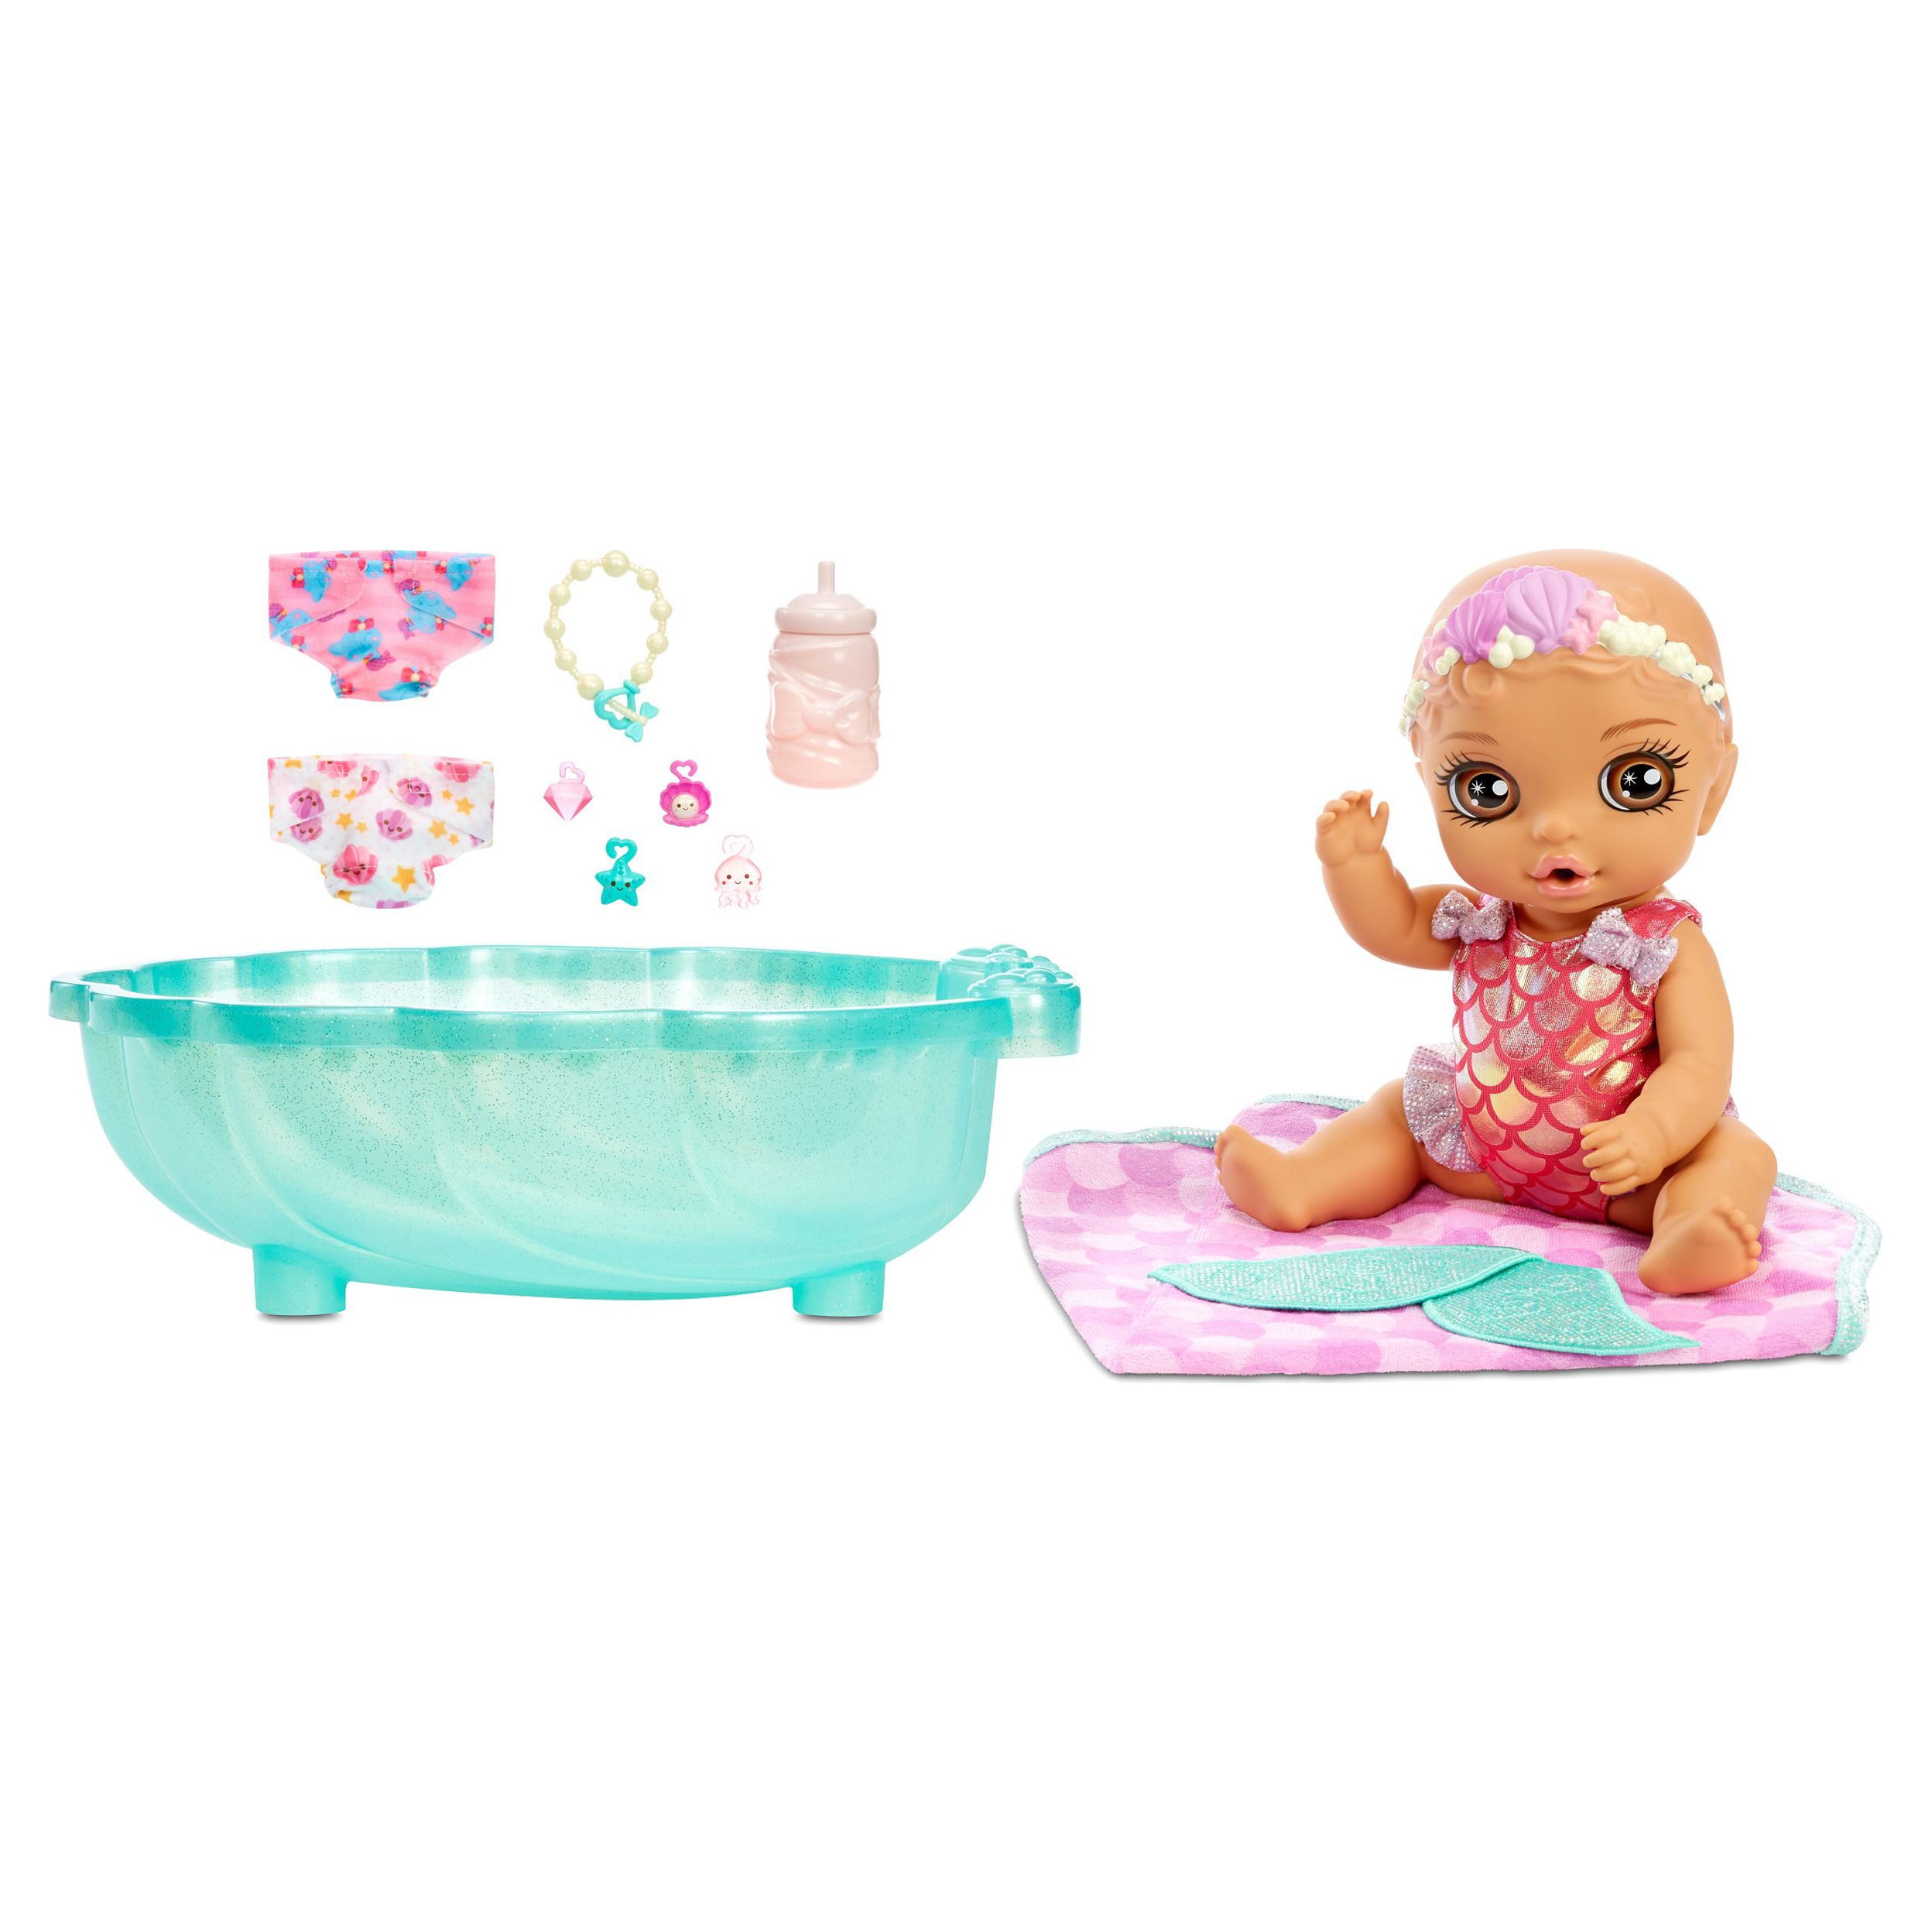 BABY born Surprise Mermaid Surprise – Baby Doll with Purple Towel and 20+ Surprises - image 7 of 7